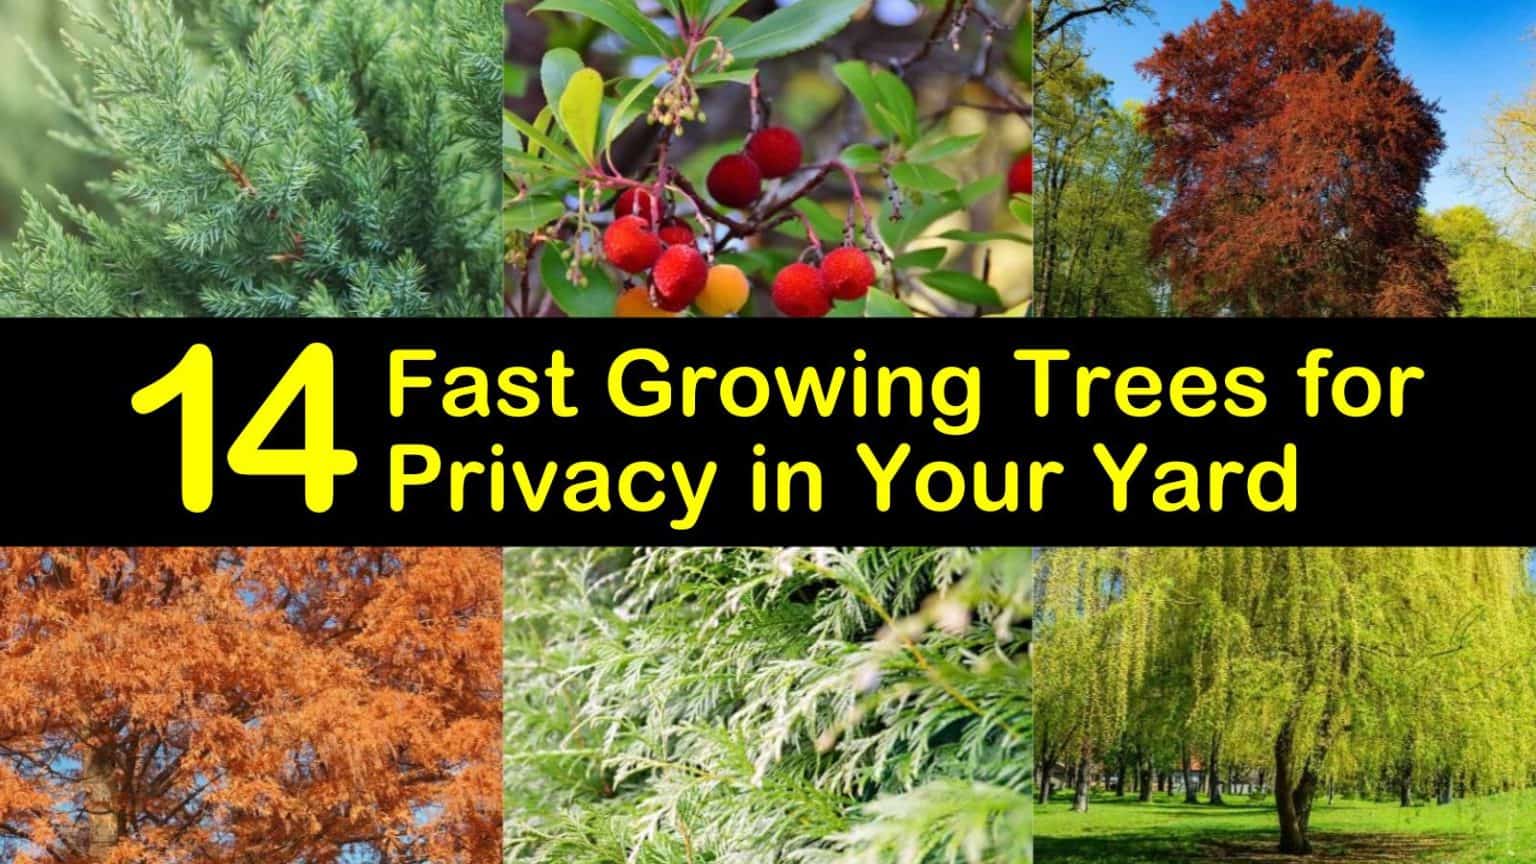 14 Fast Growing Trees for Privacy in Your Yard - Fast Growing Trees For Privacy T1 1536x864